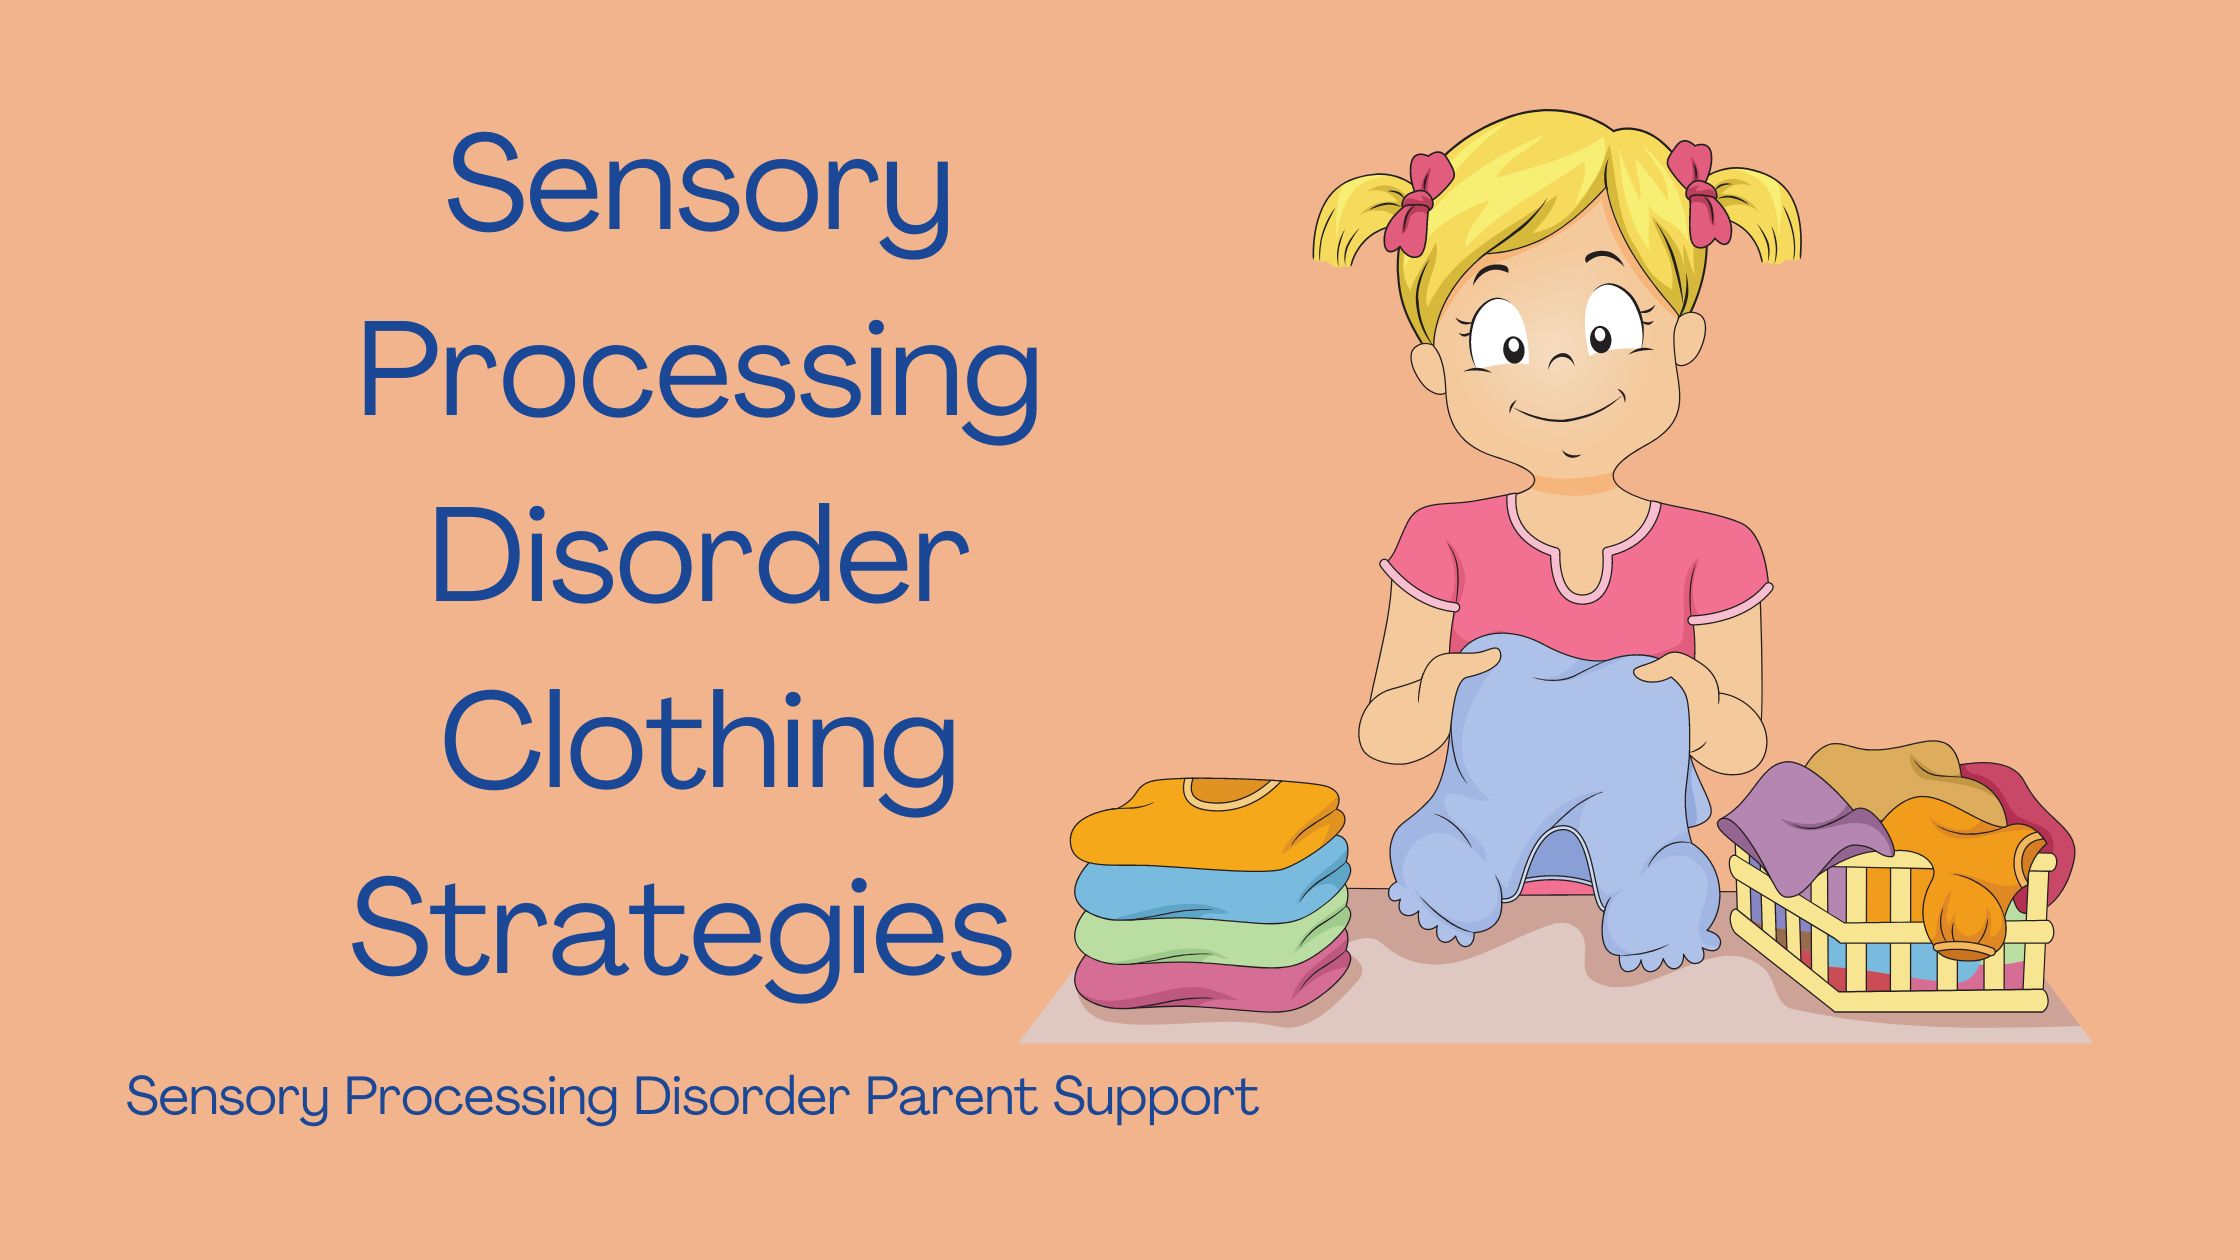 child with sensory processing disorder  folding clothing in basket of laundry Sensory Processing Disorder Clothing Strategies